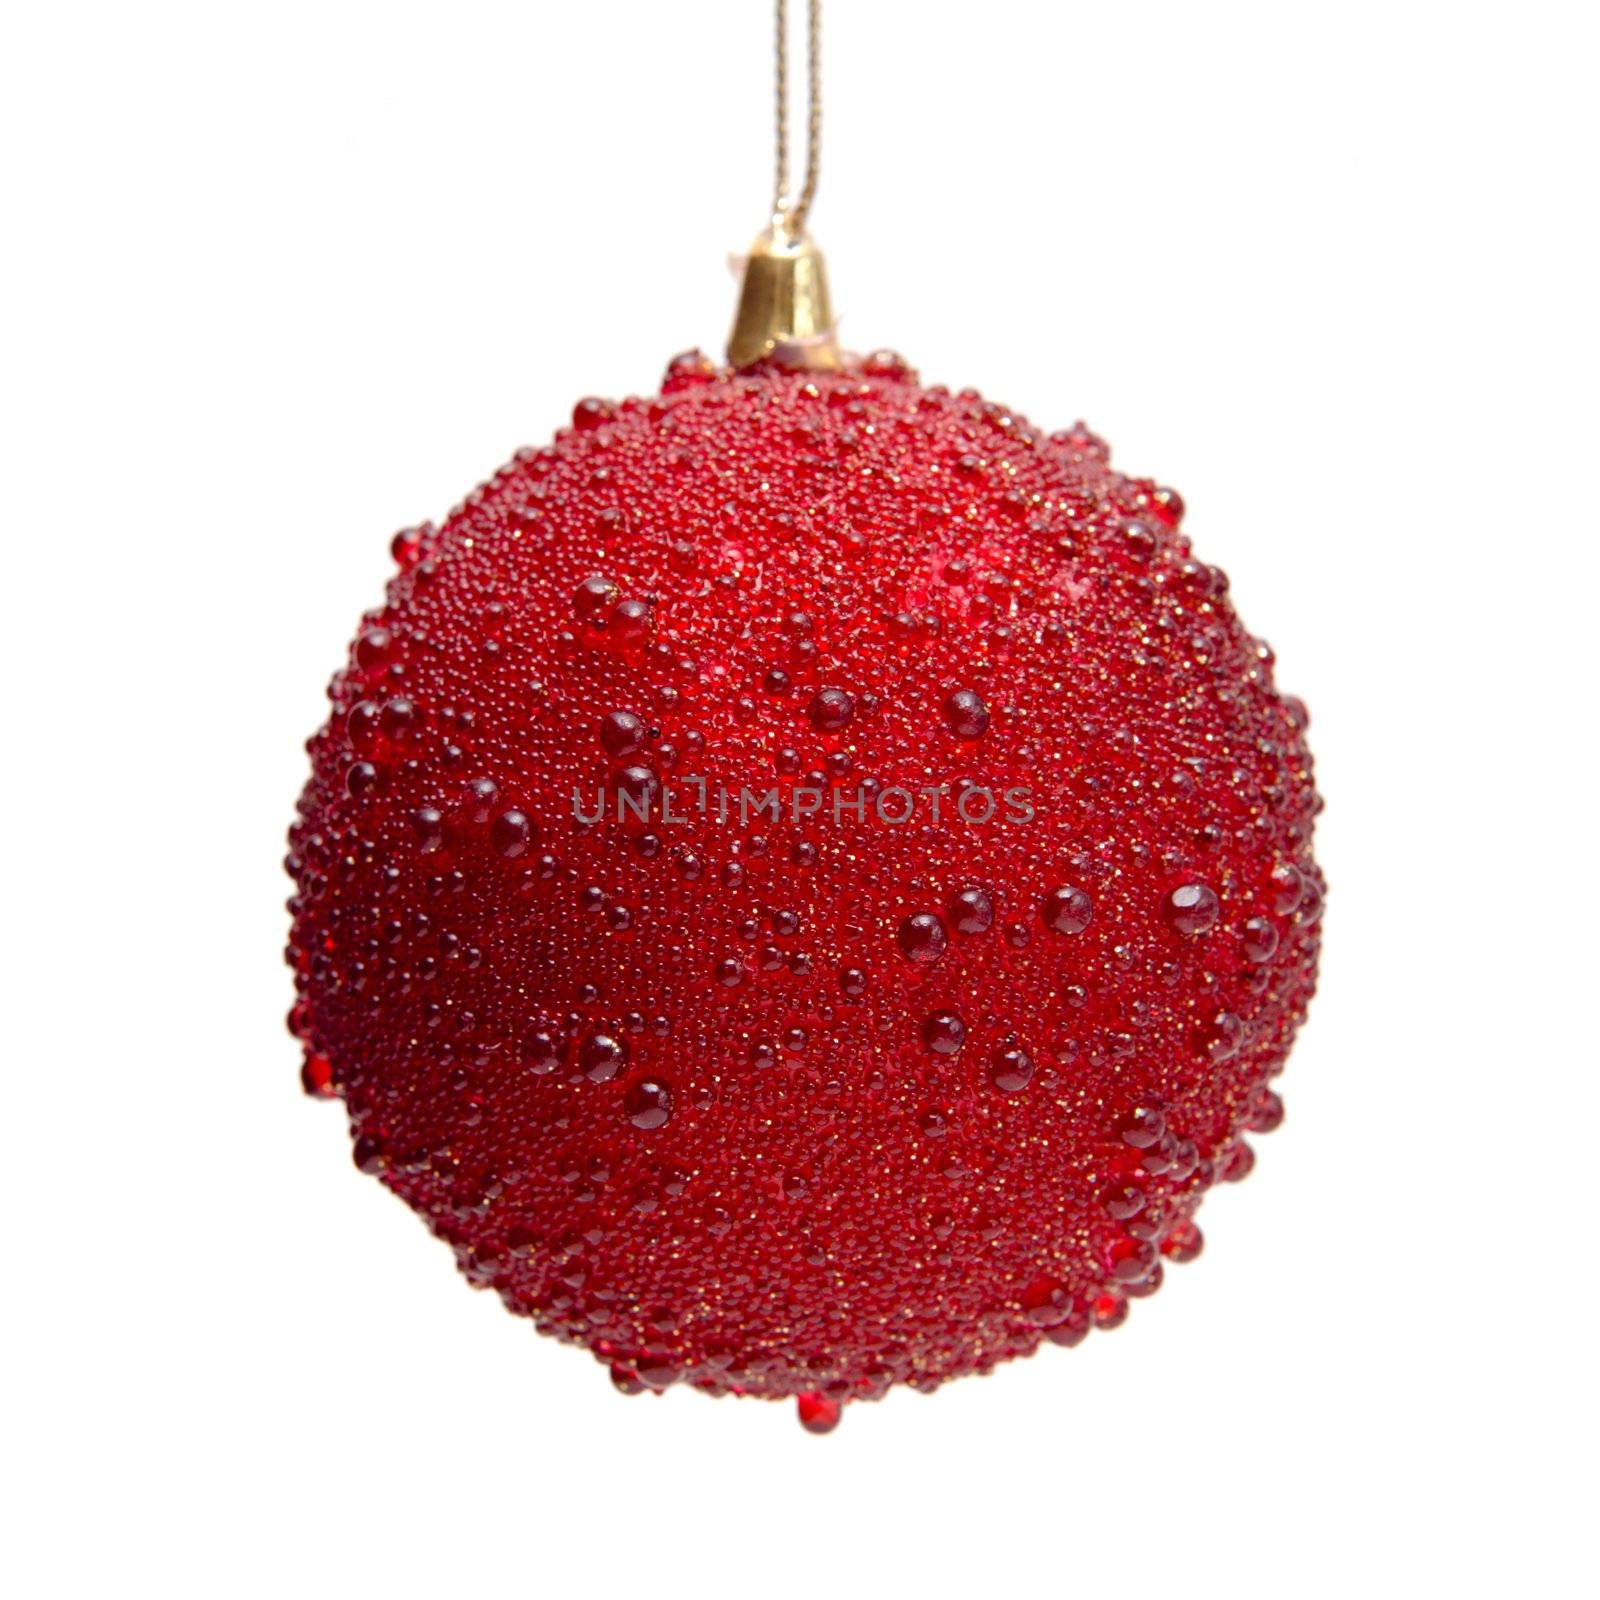 Red christmas bauble hanging in isolation